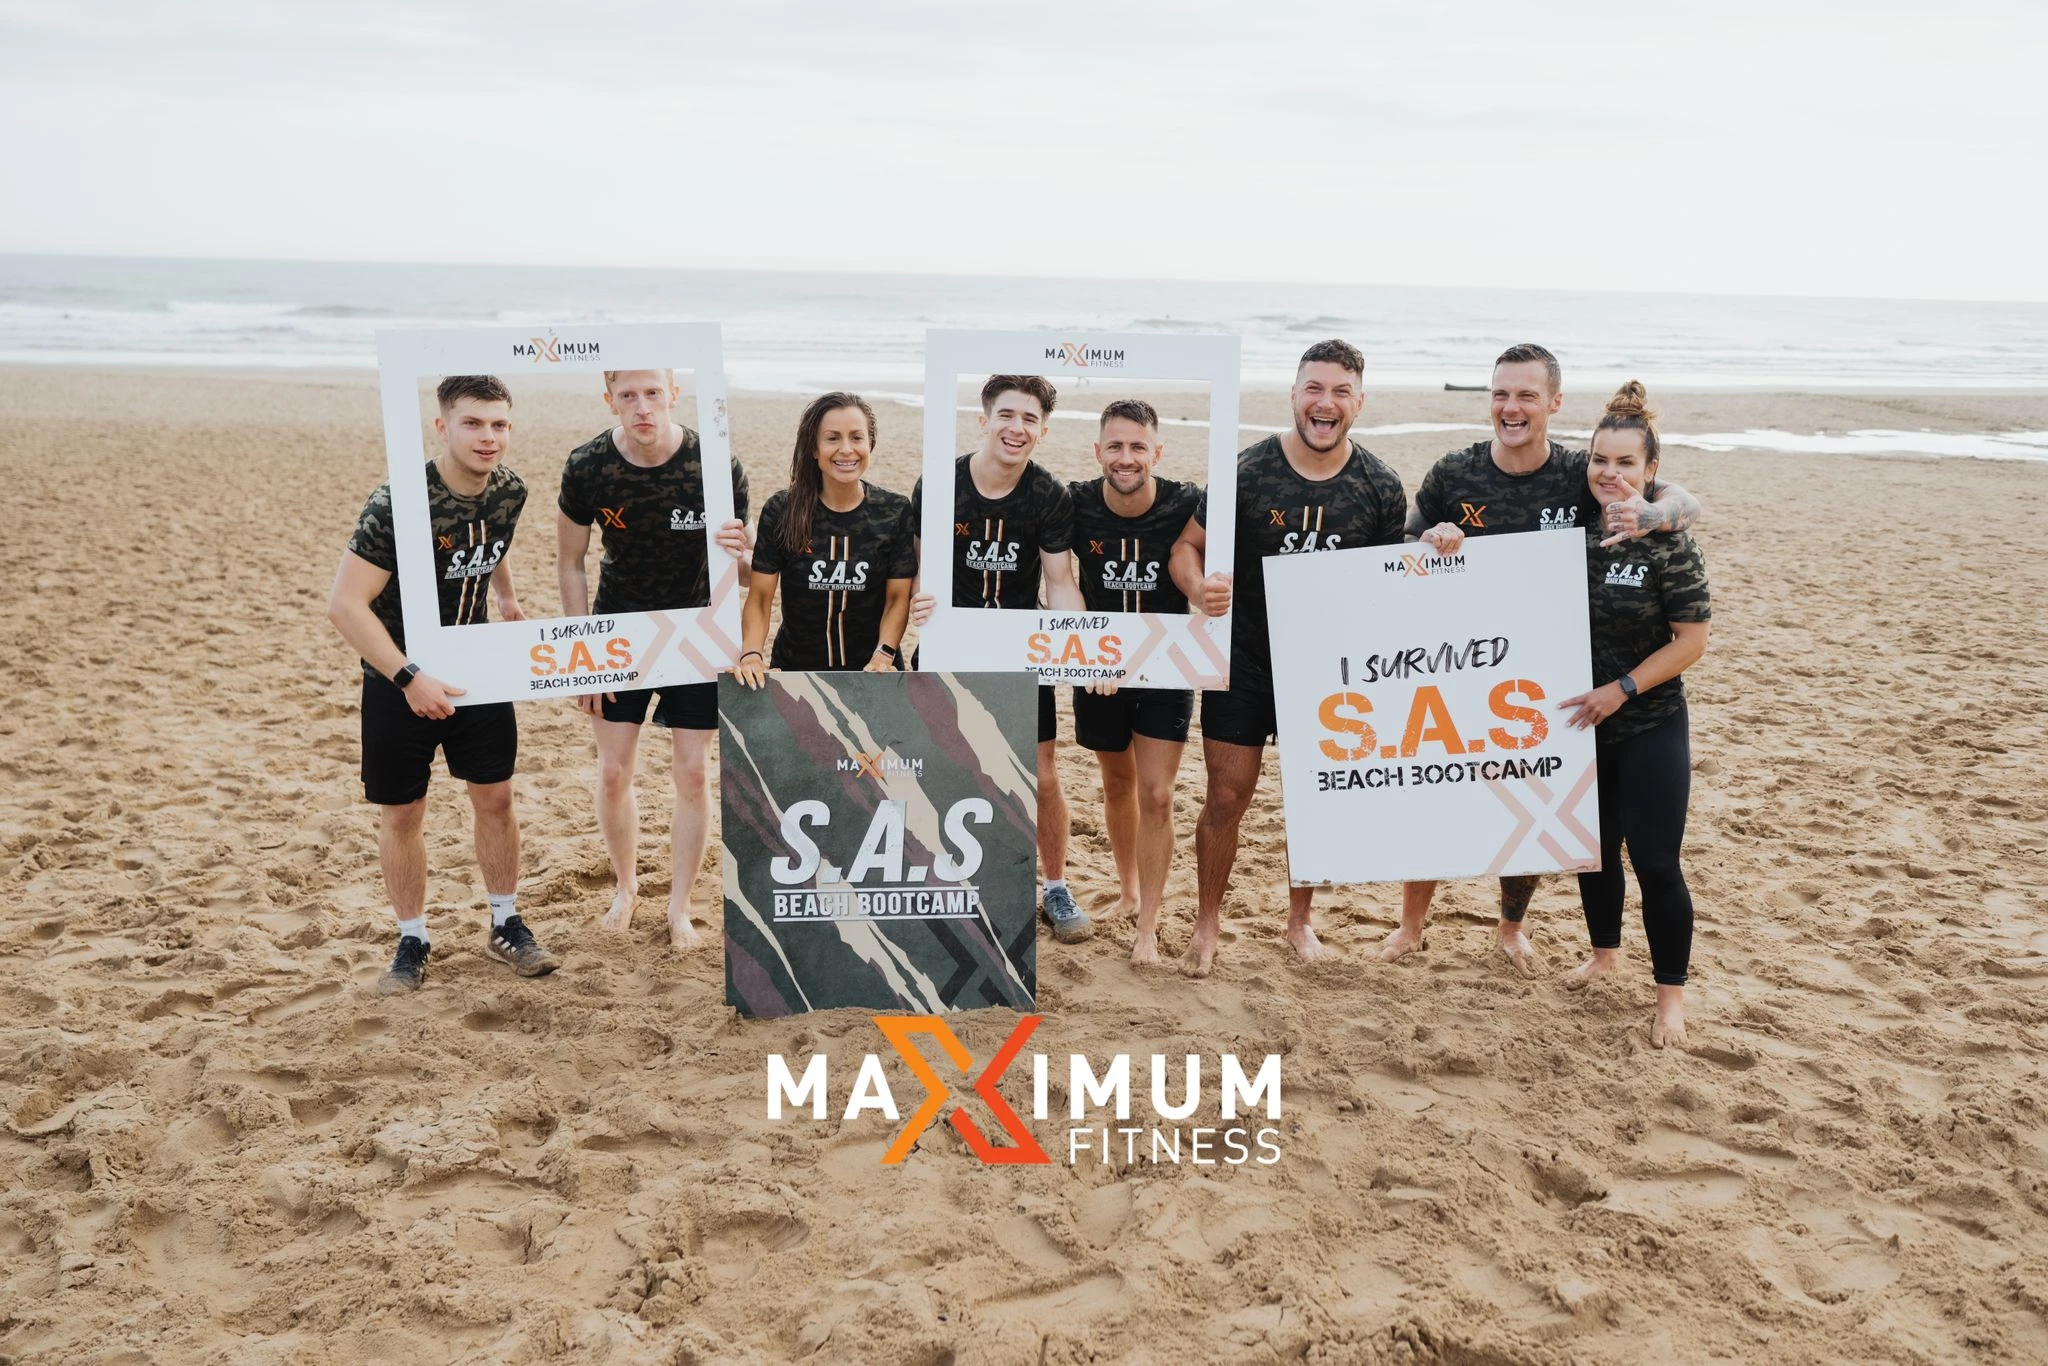 Participants at Maximum Fitness S.A.S Charity Beach Bootcamp for Feeding Families